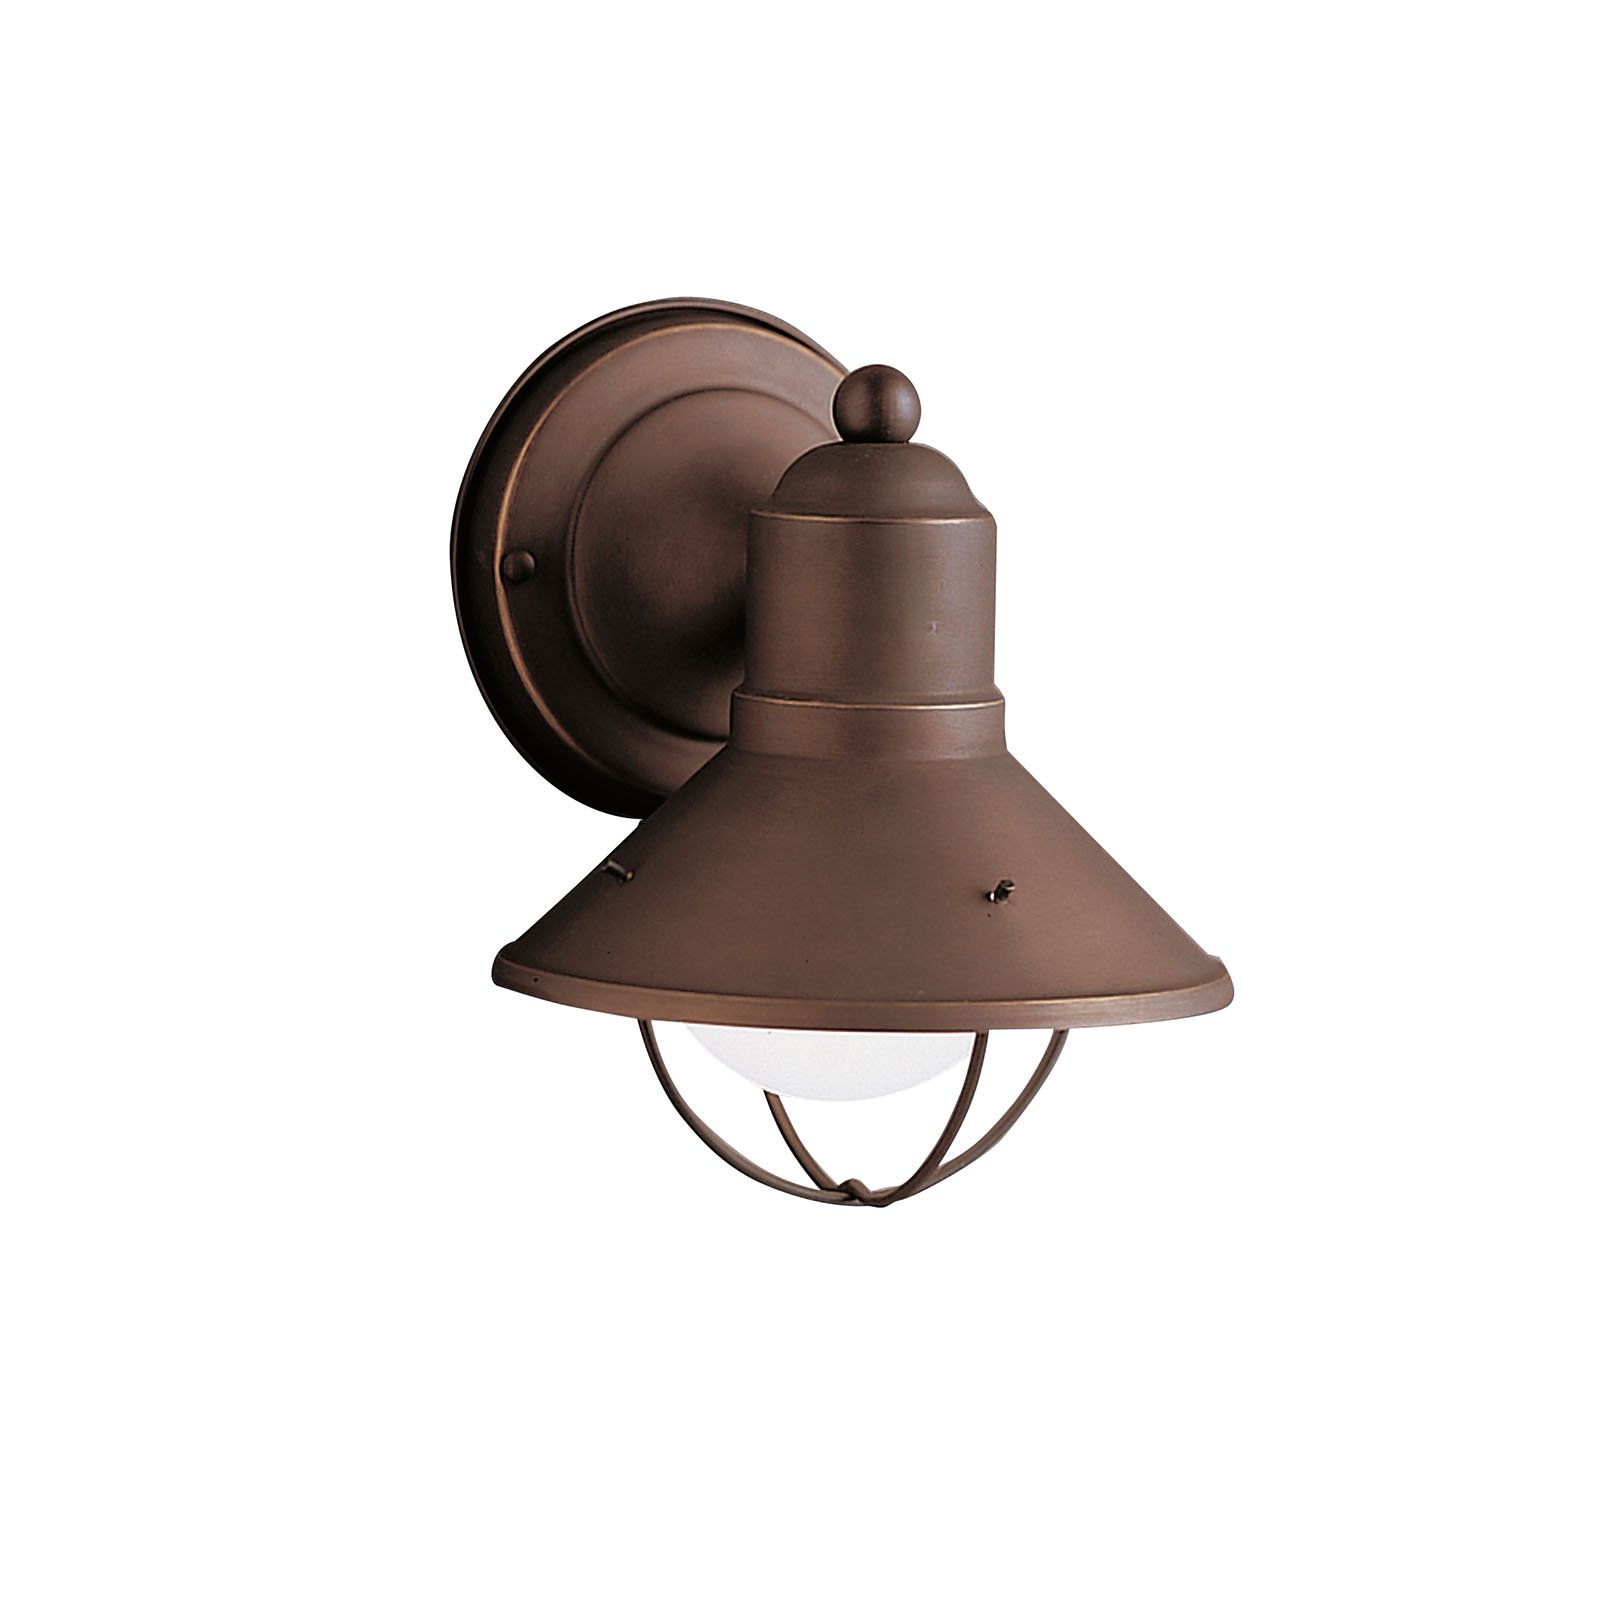 The Seaside(TM) 7.5in. 1 light outdoor wall light features a classic look with its Olde Bronze(R) finish and glass globe. The Seaside(TM)wall light works in several aesthetic environments, including rustic, coastal, traditional and transitional.